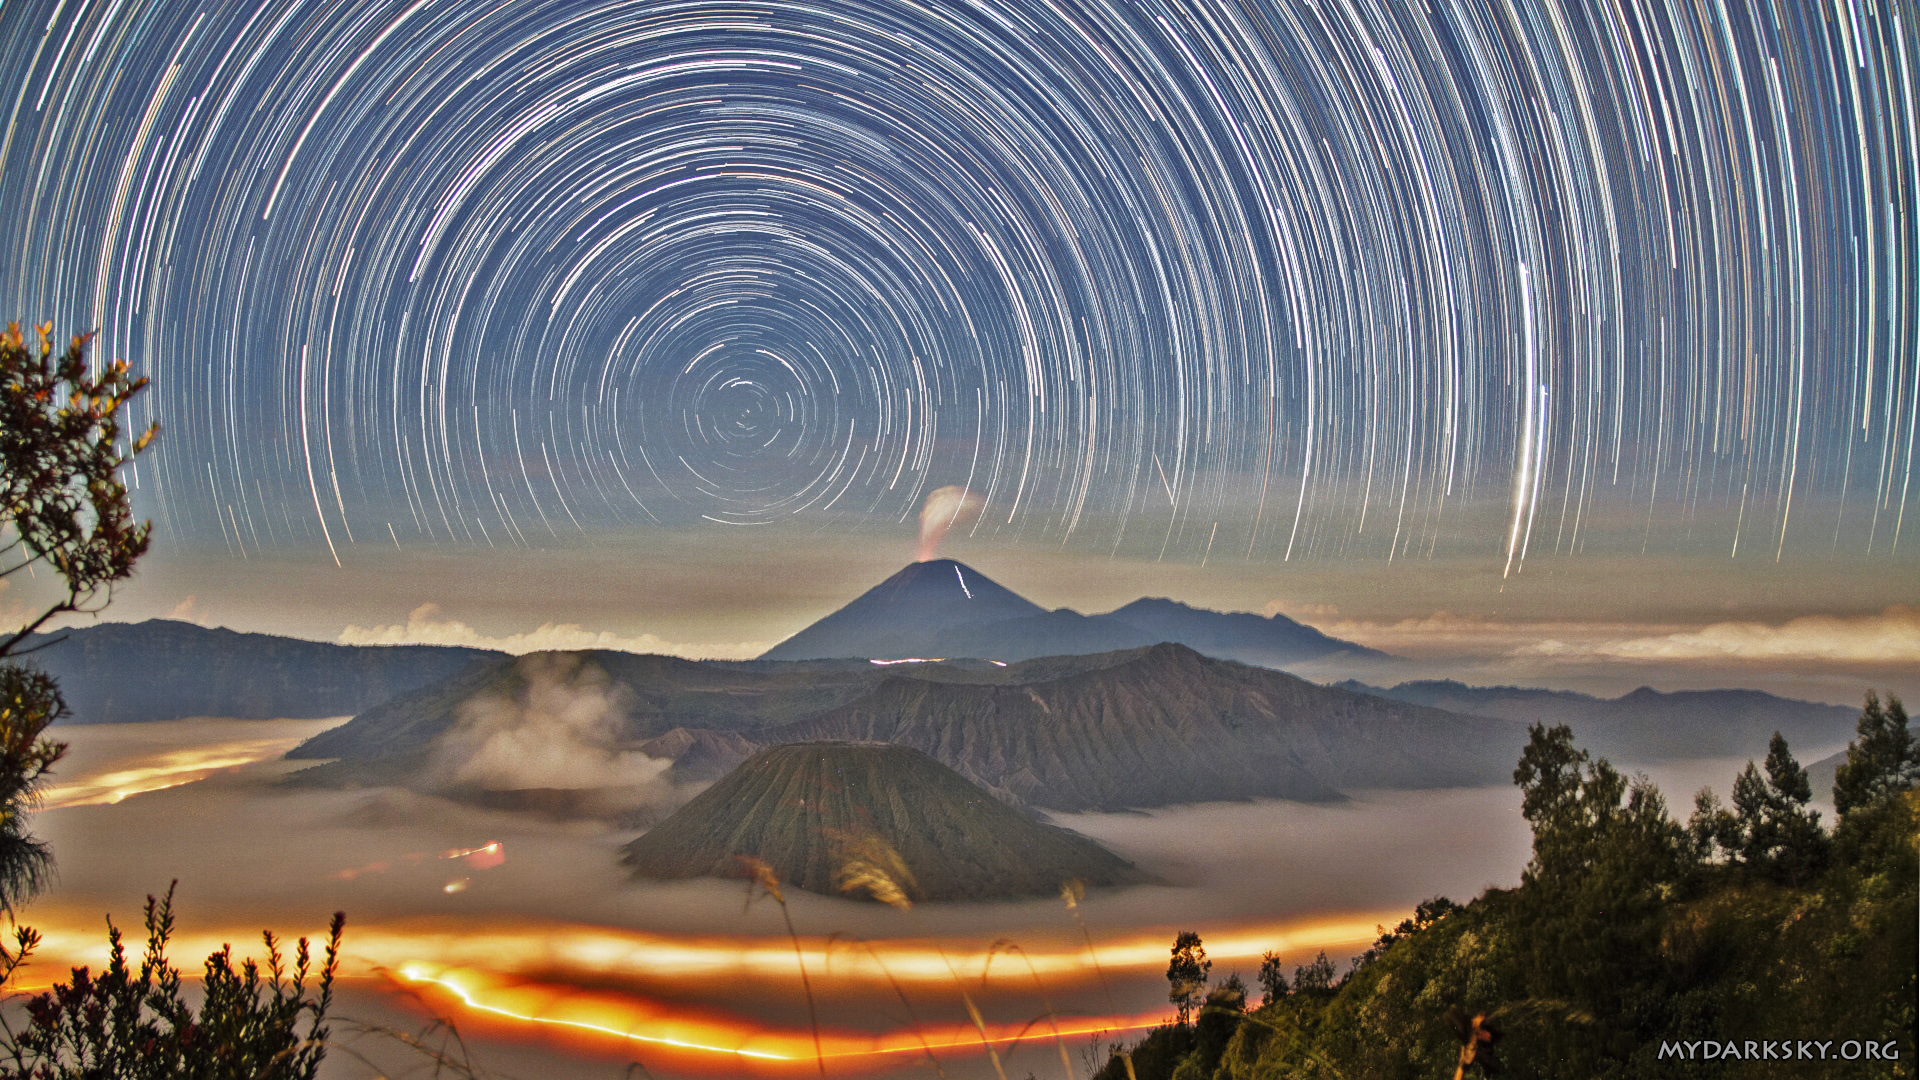 Star Trails Over Indonesia